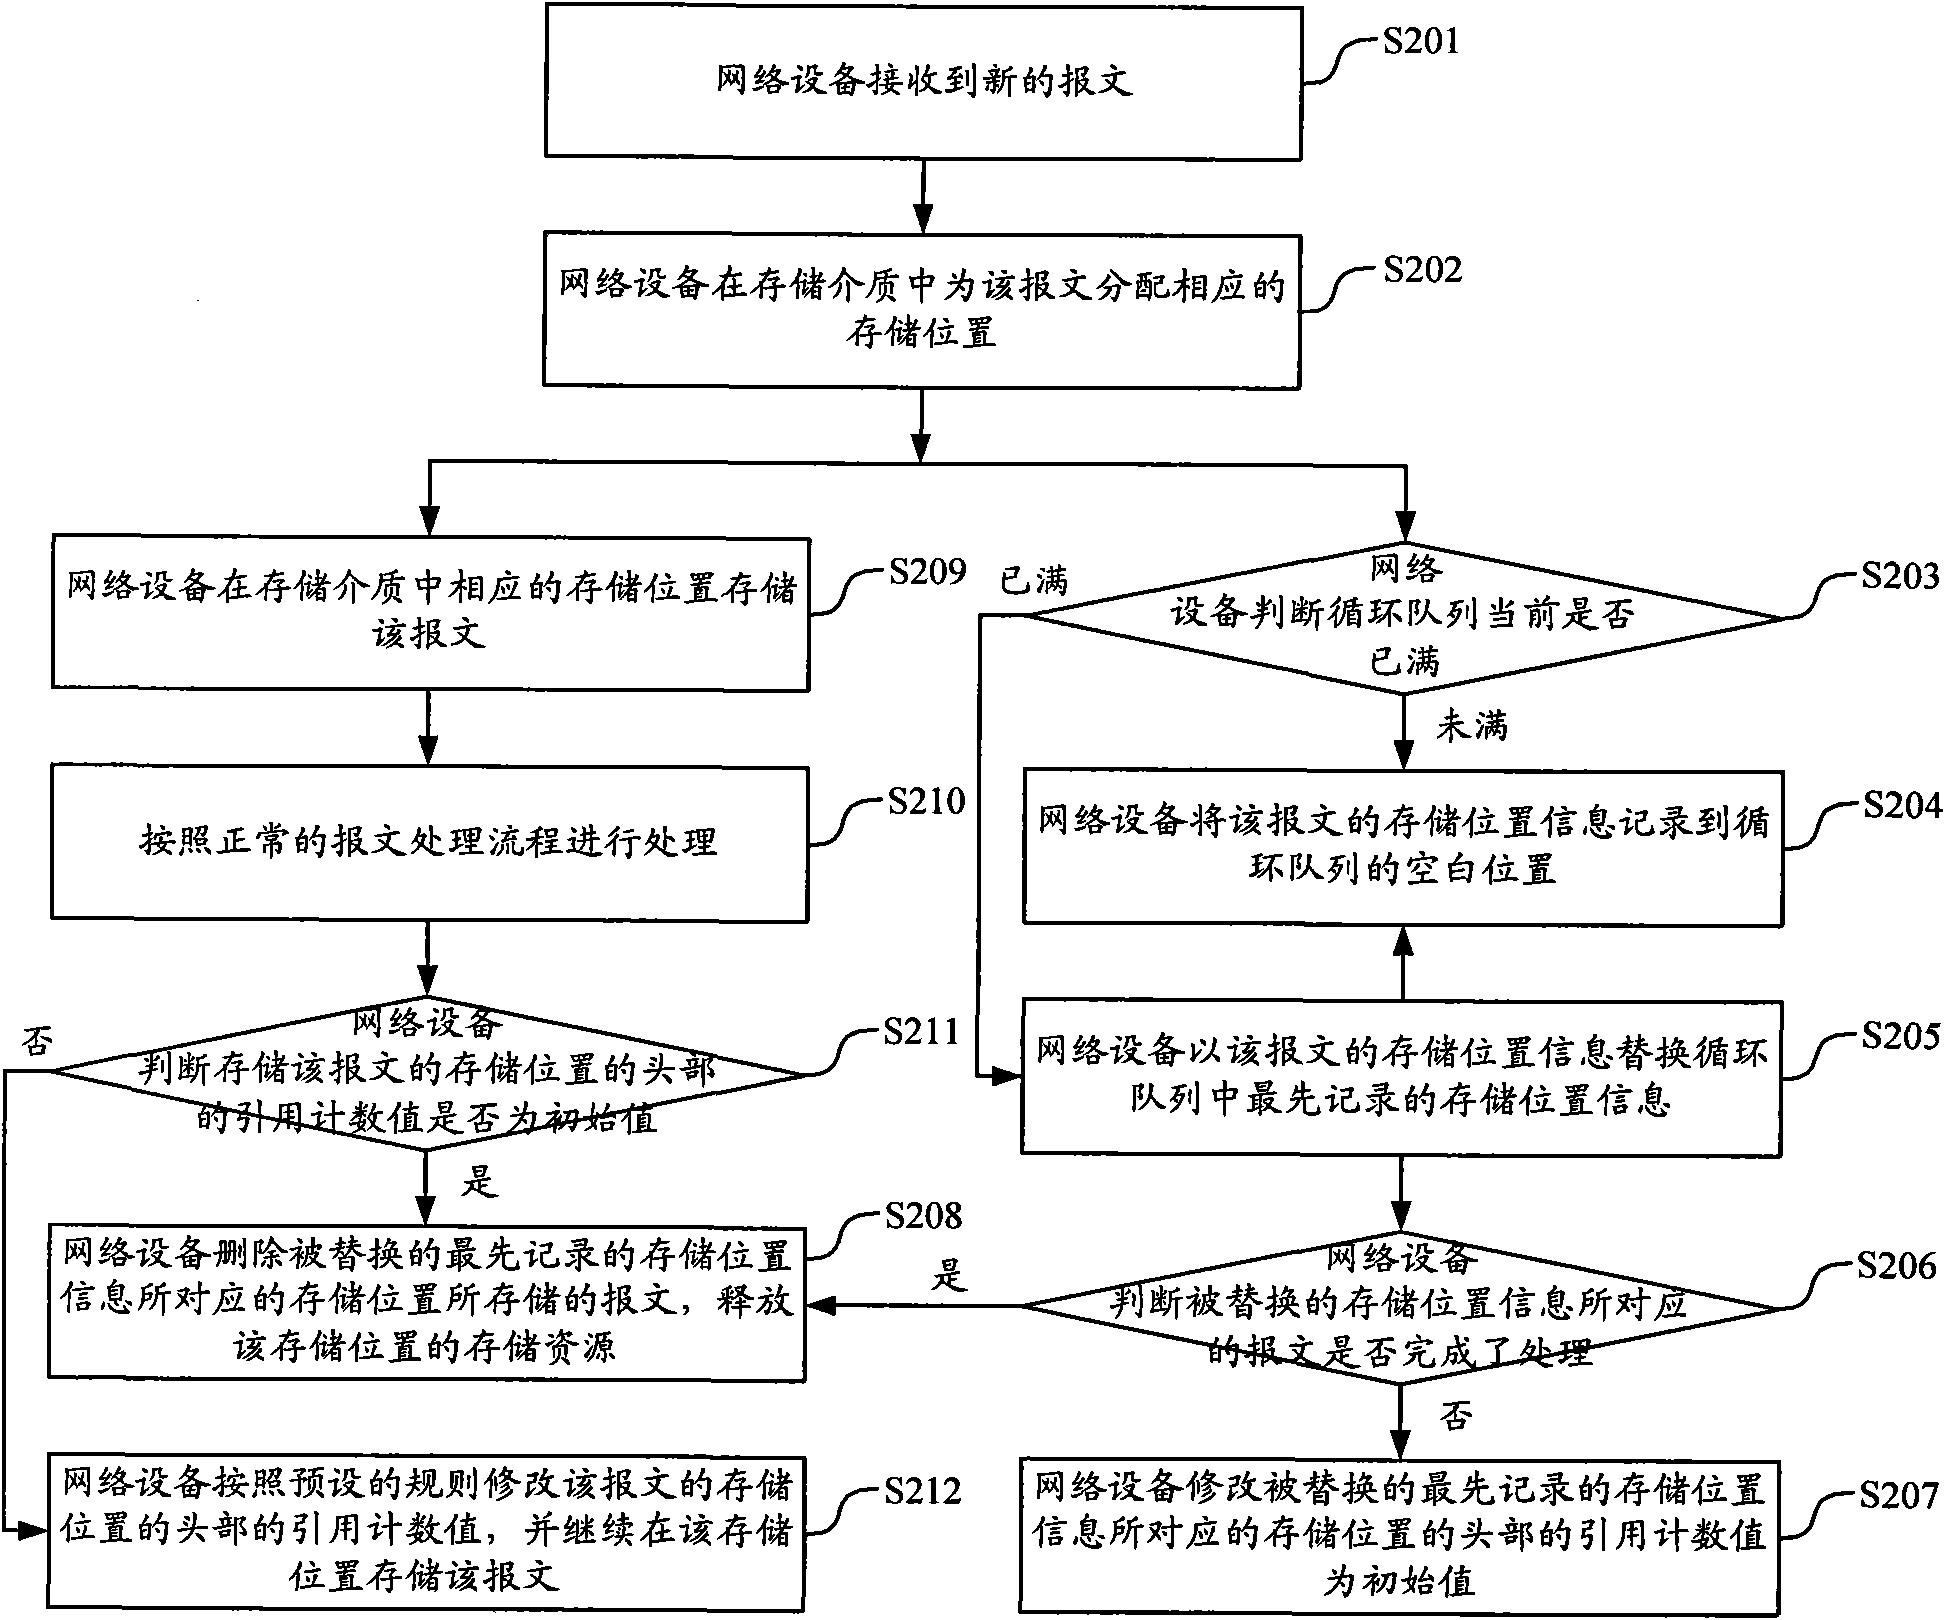 Method and equipment for obtaining attack message